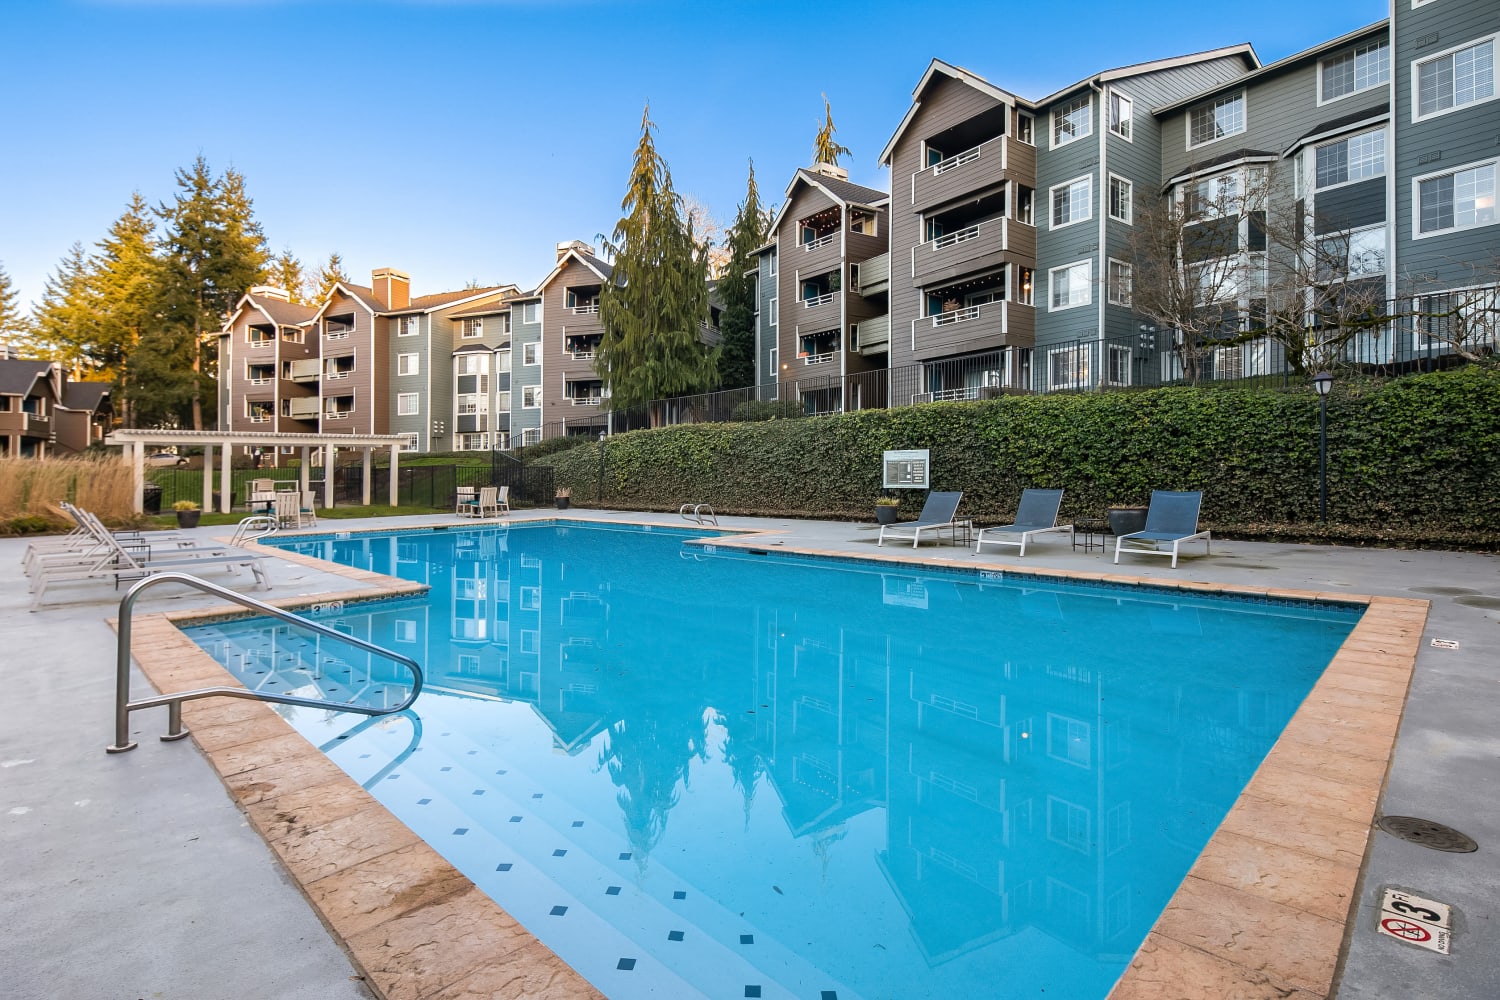 The community swimming pool at Overlook at Lakemont in Bellevue, Washington